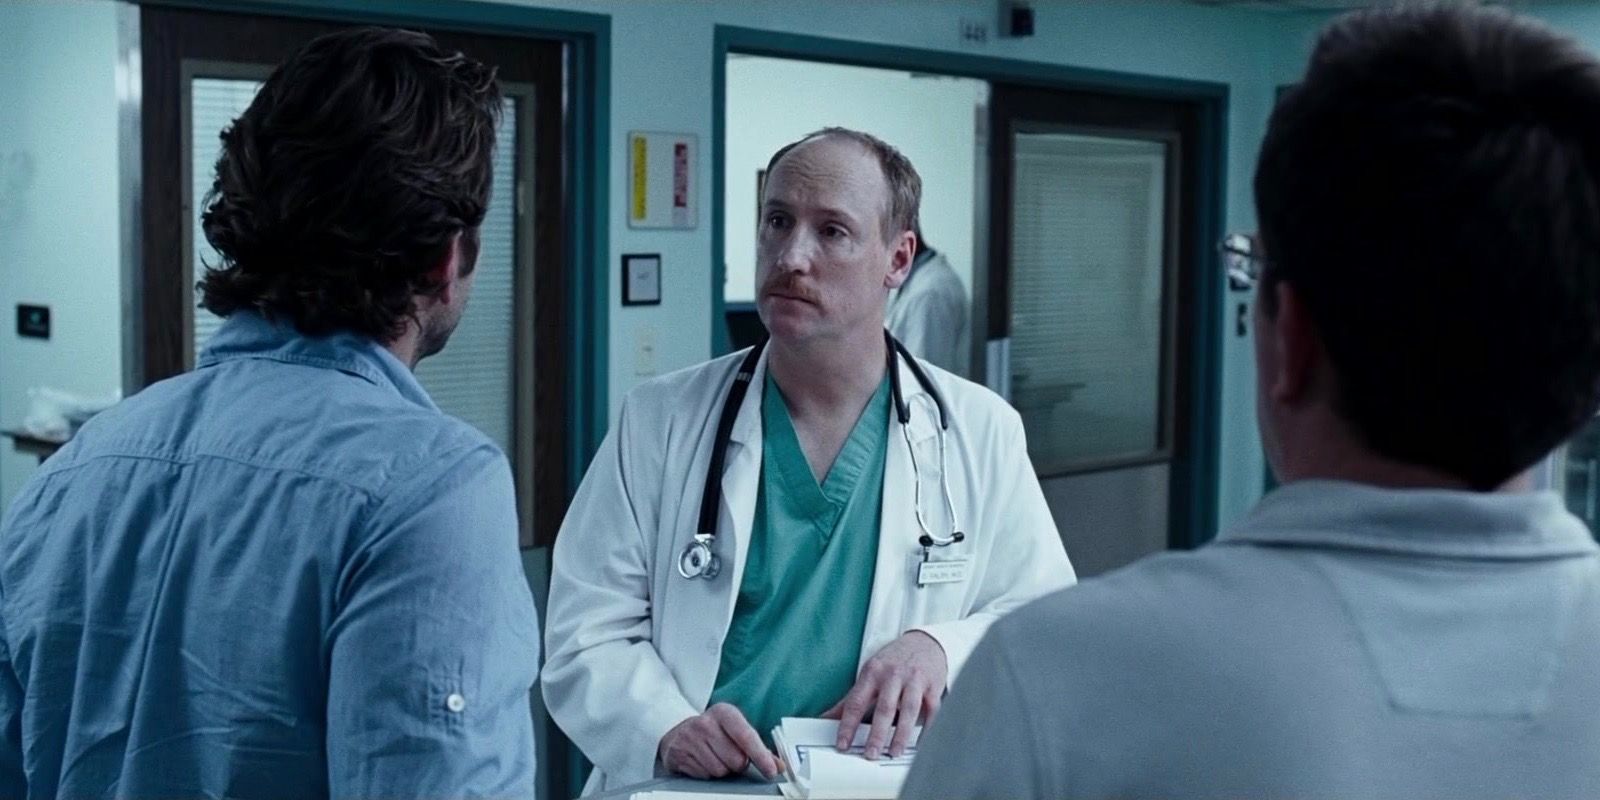 Matt Walsh as Doctor Valsh talking to the guys in The Hangover